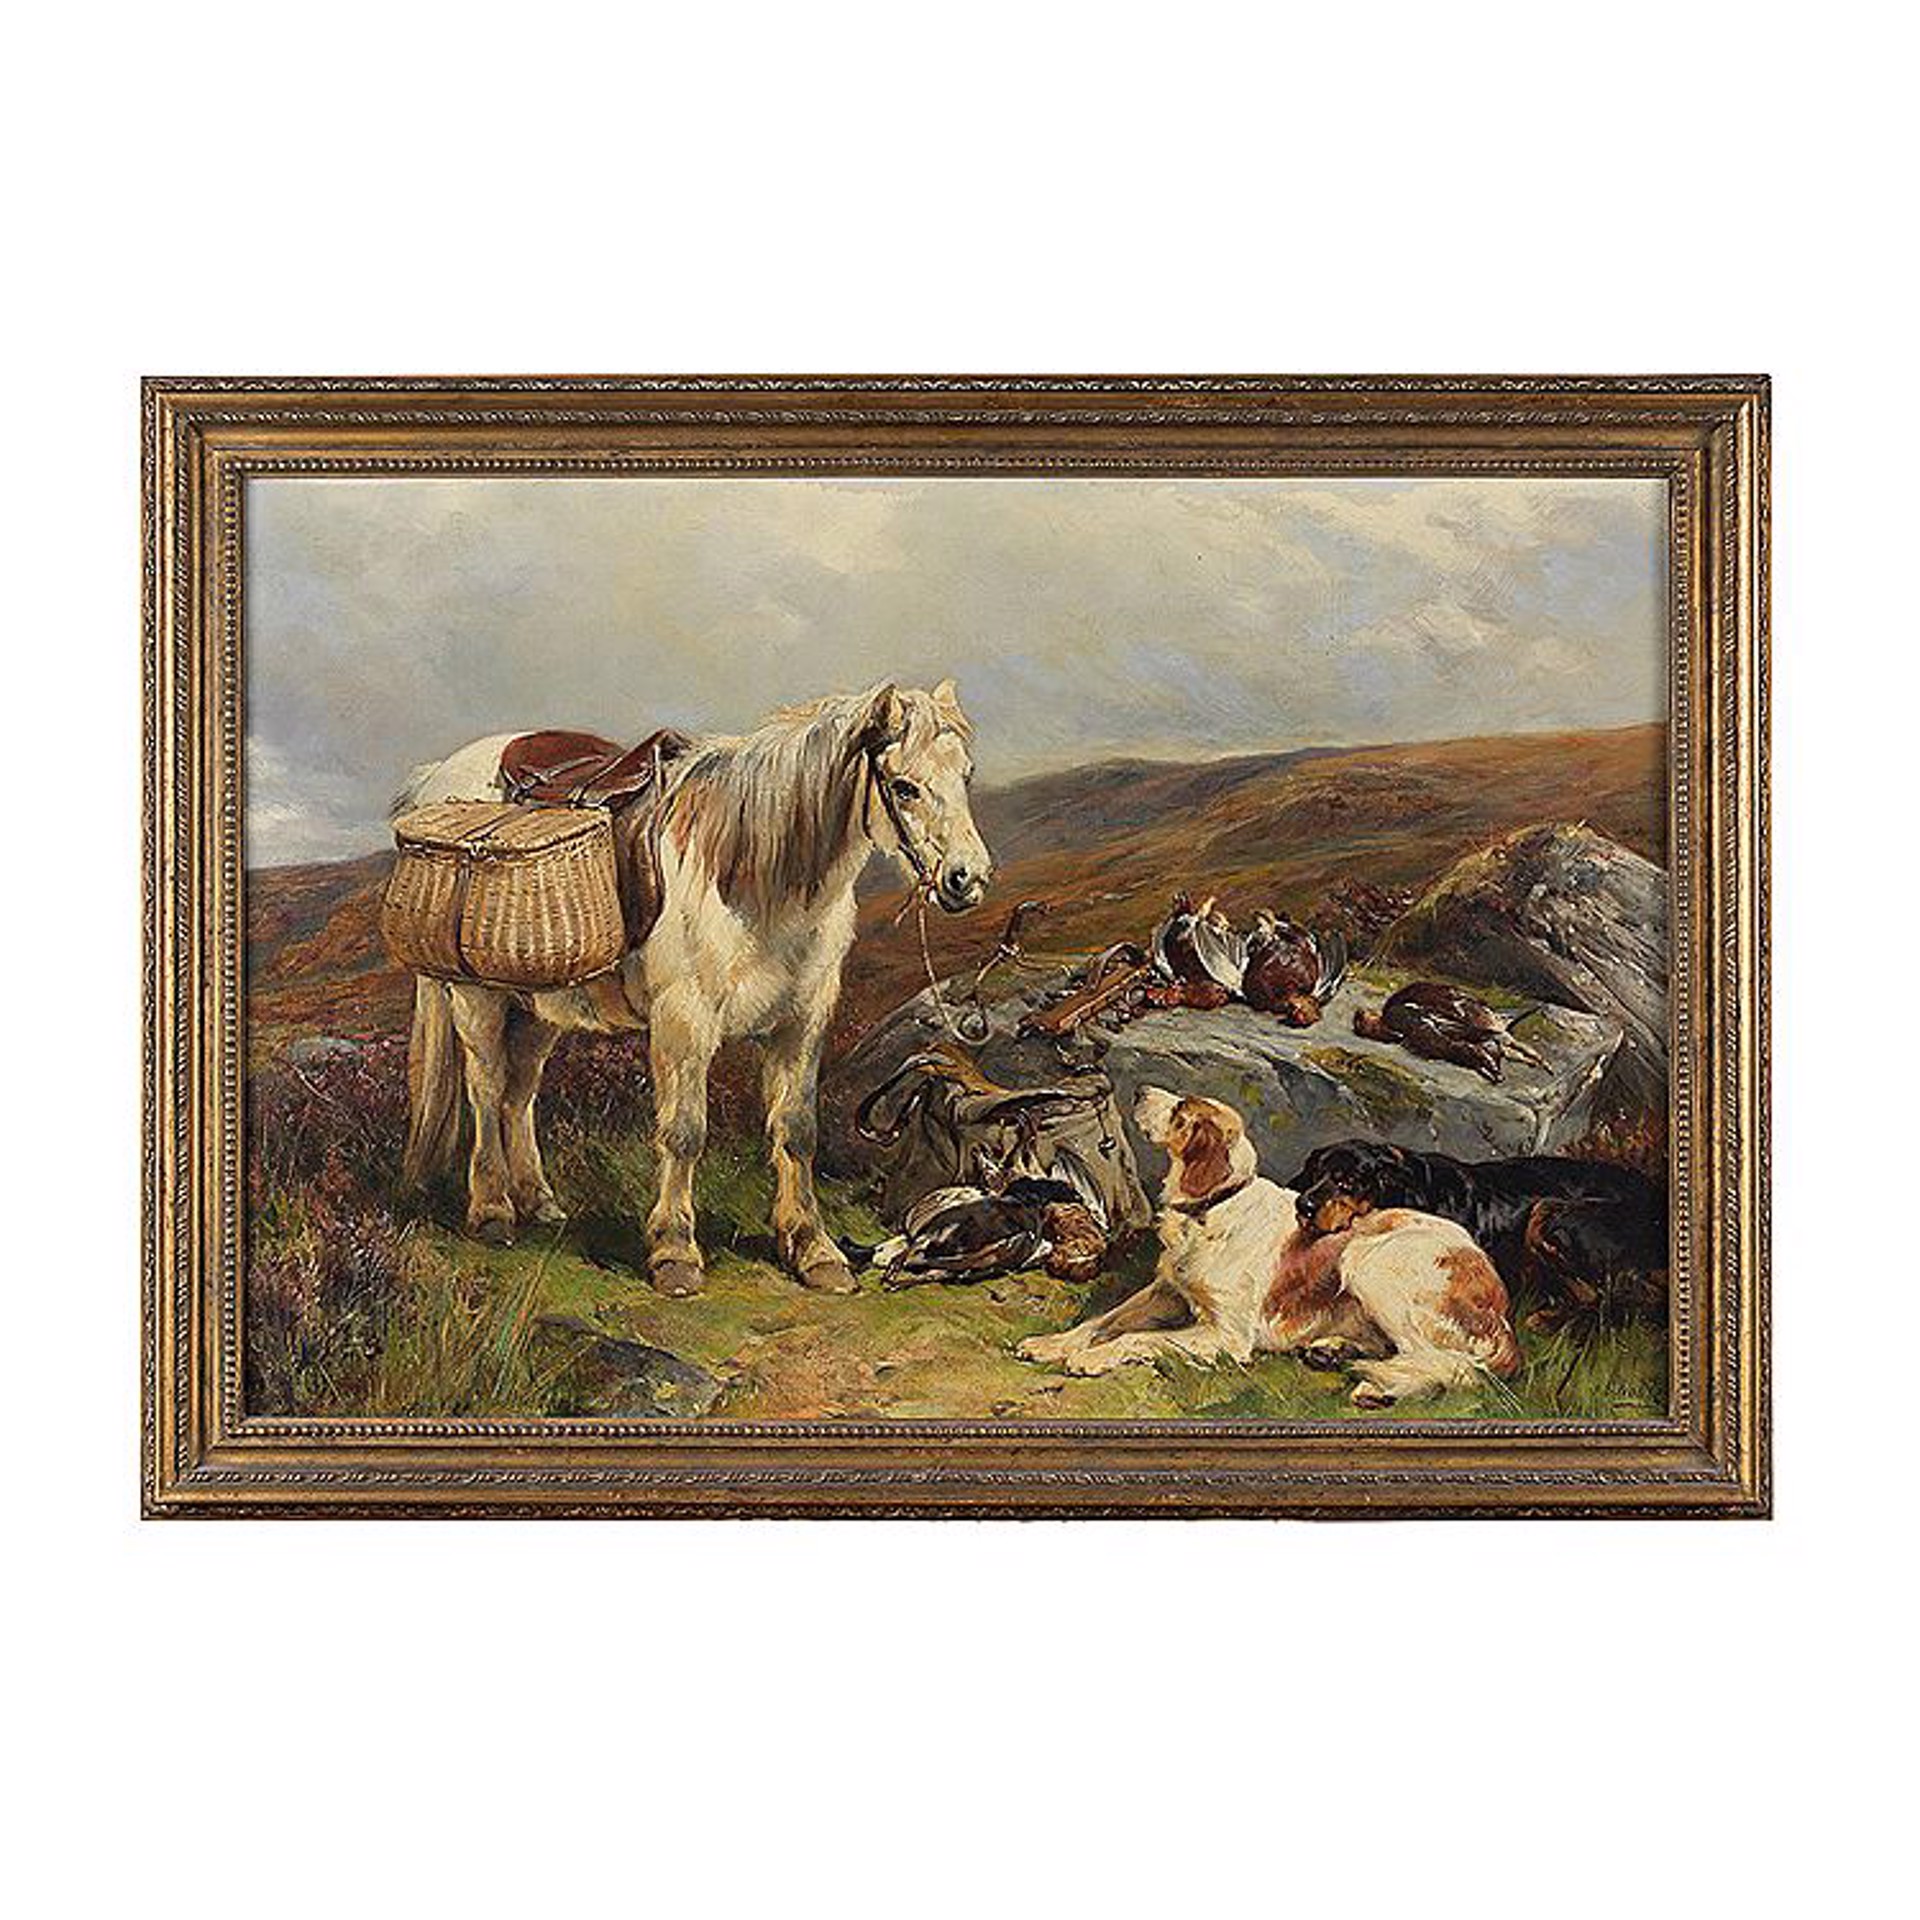 Scottish Pony and Game by John Sargent Noble